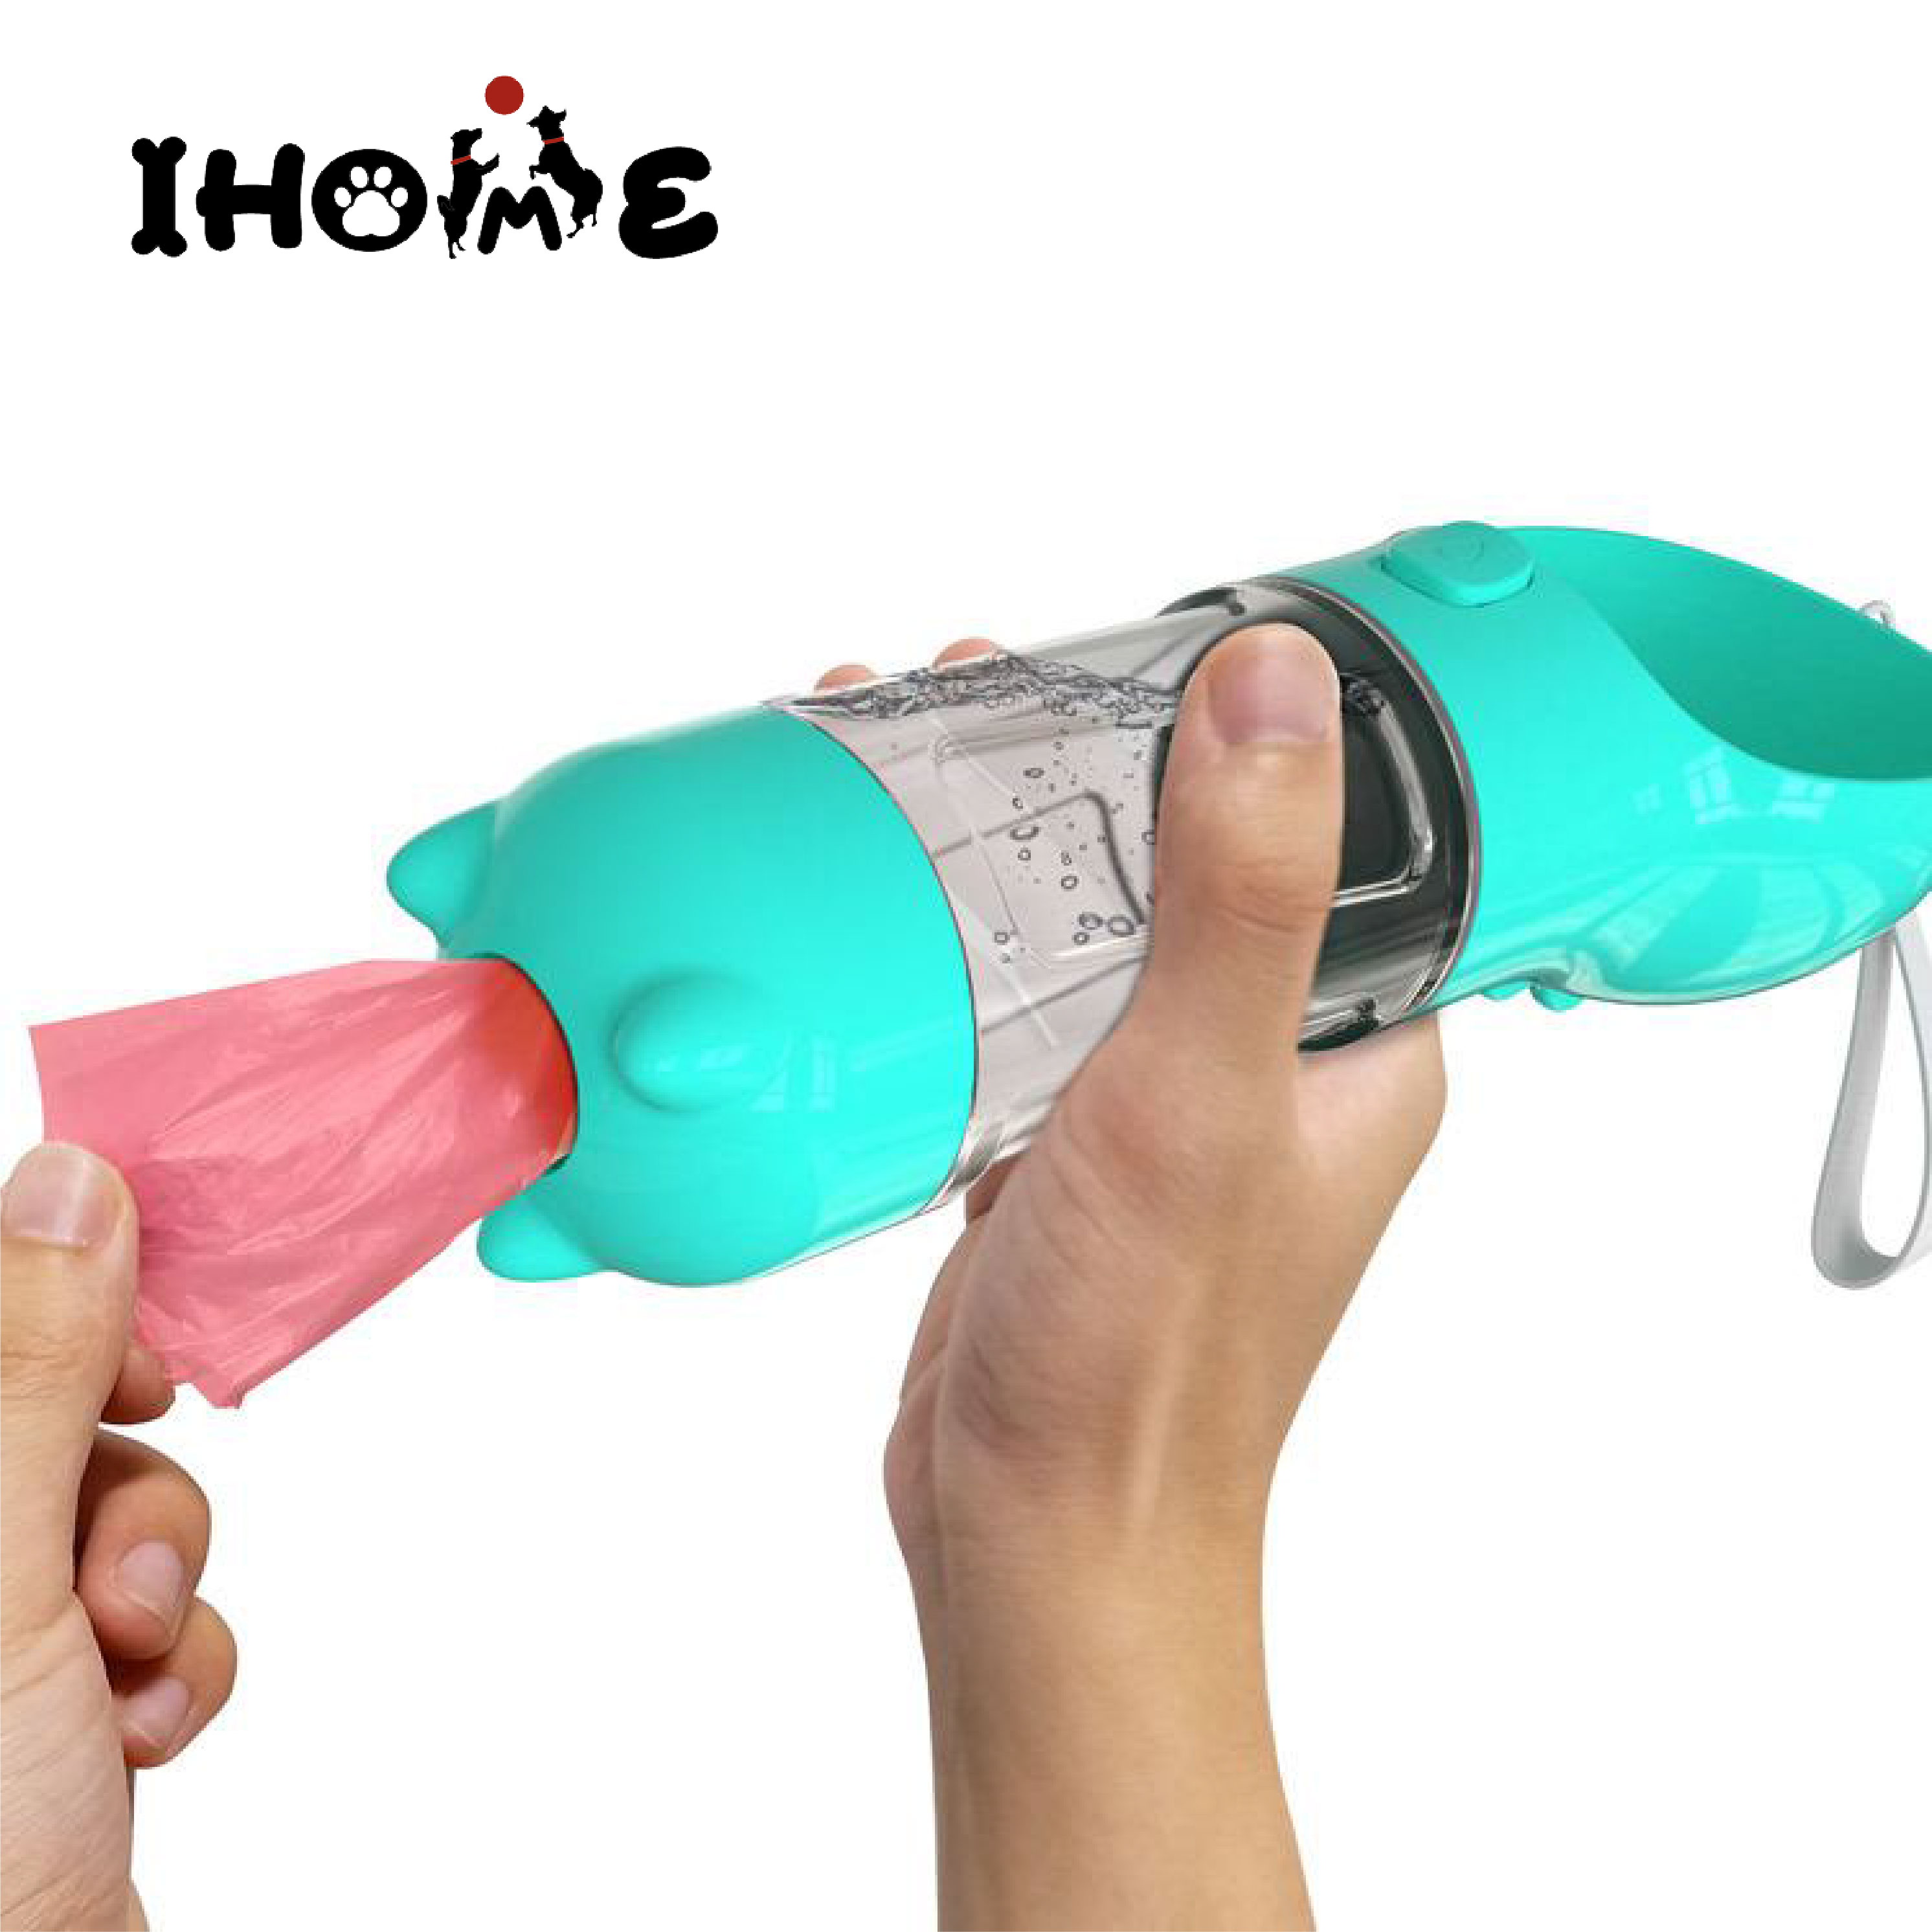 2020 new design 3-in-1 pet travel water bottle, outdoor dog drinking and food bottle with poop bag separator, multifunctional outdoor pet bottle, hot outdoor pet travel water bottle, newly designed 2020 new dog outdoor water and food cup, pet feces, water and food three-in-one bottle Featured Image